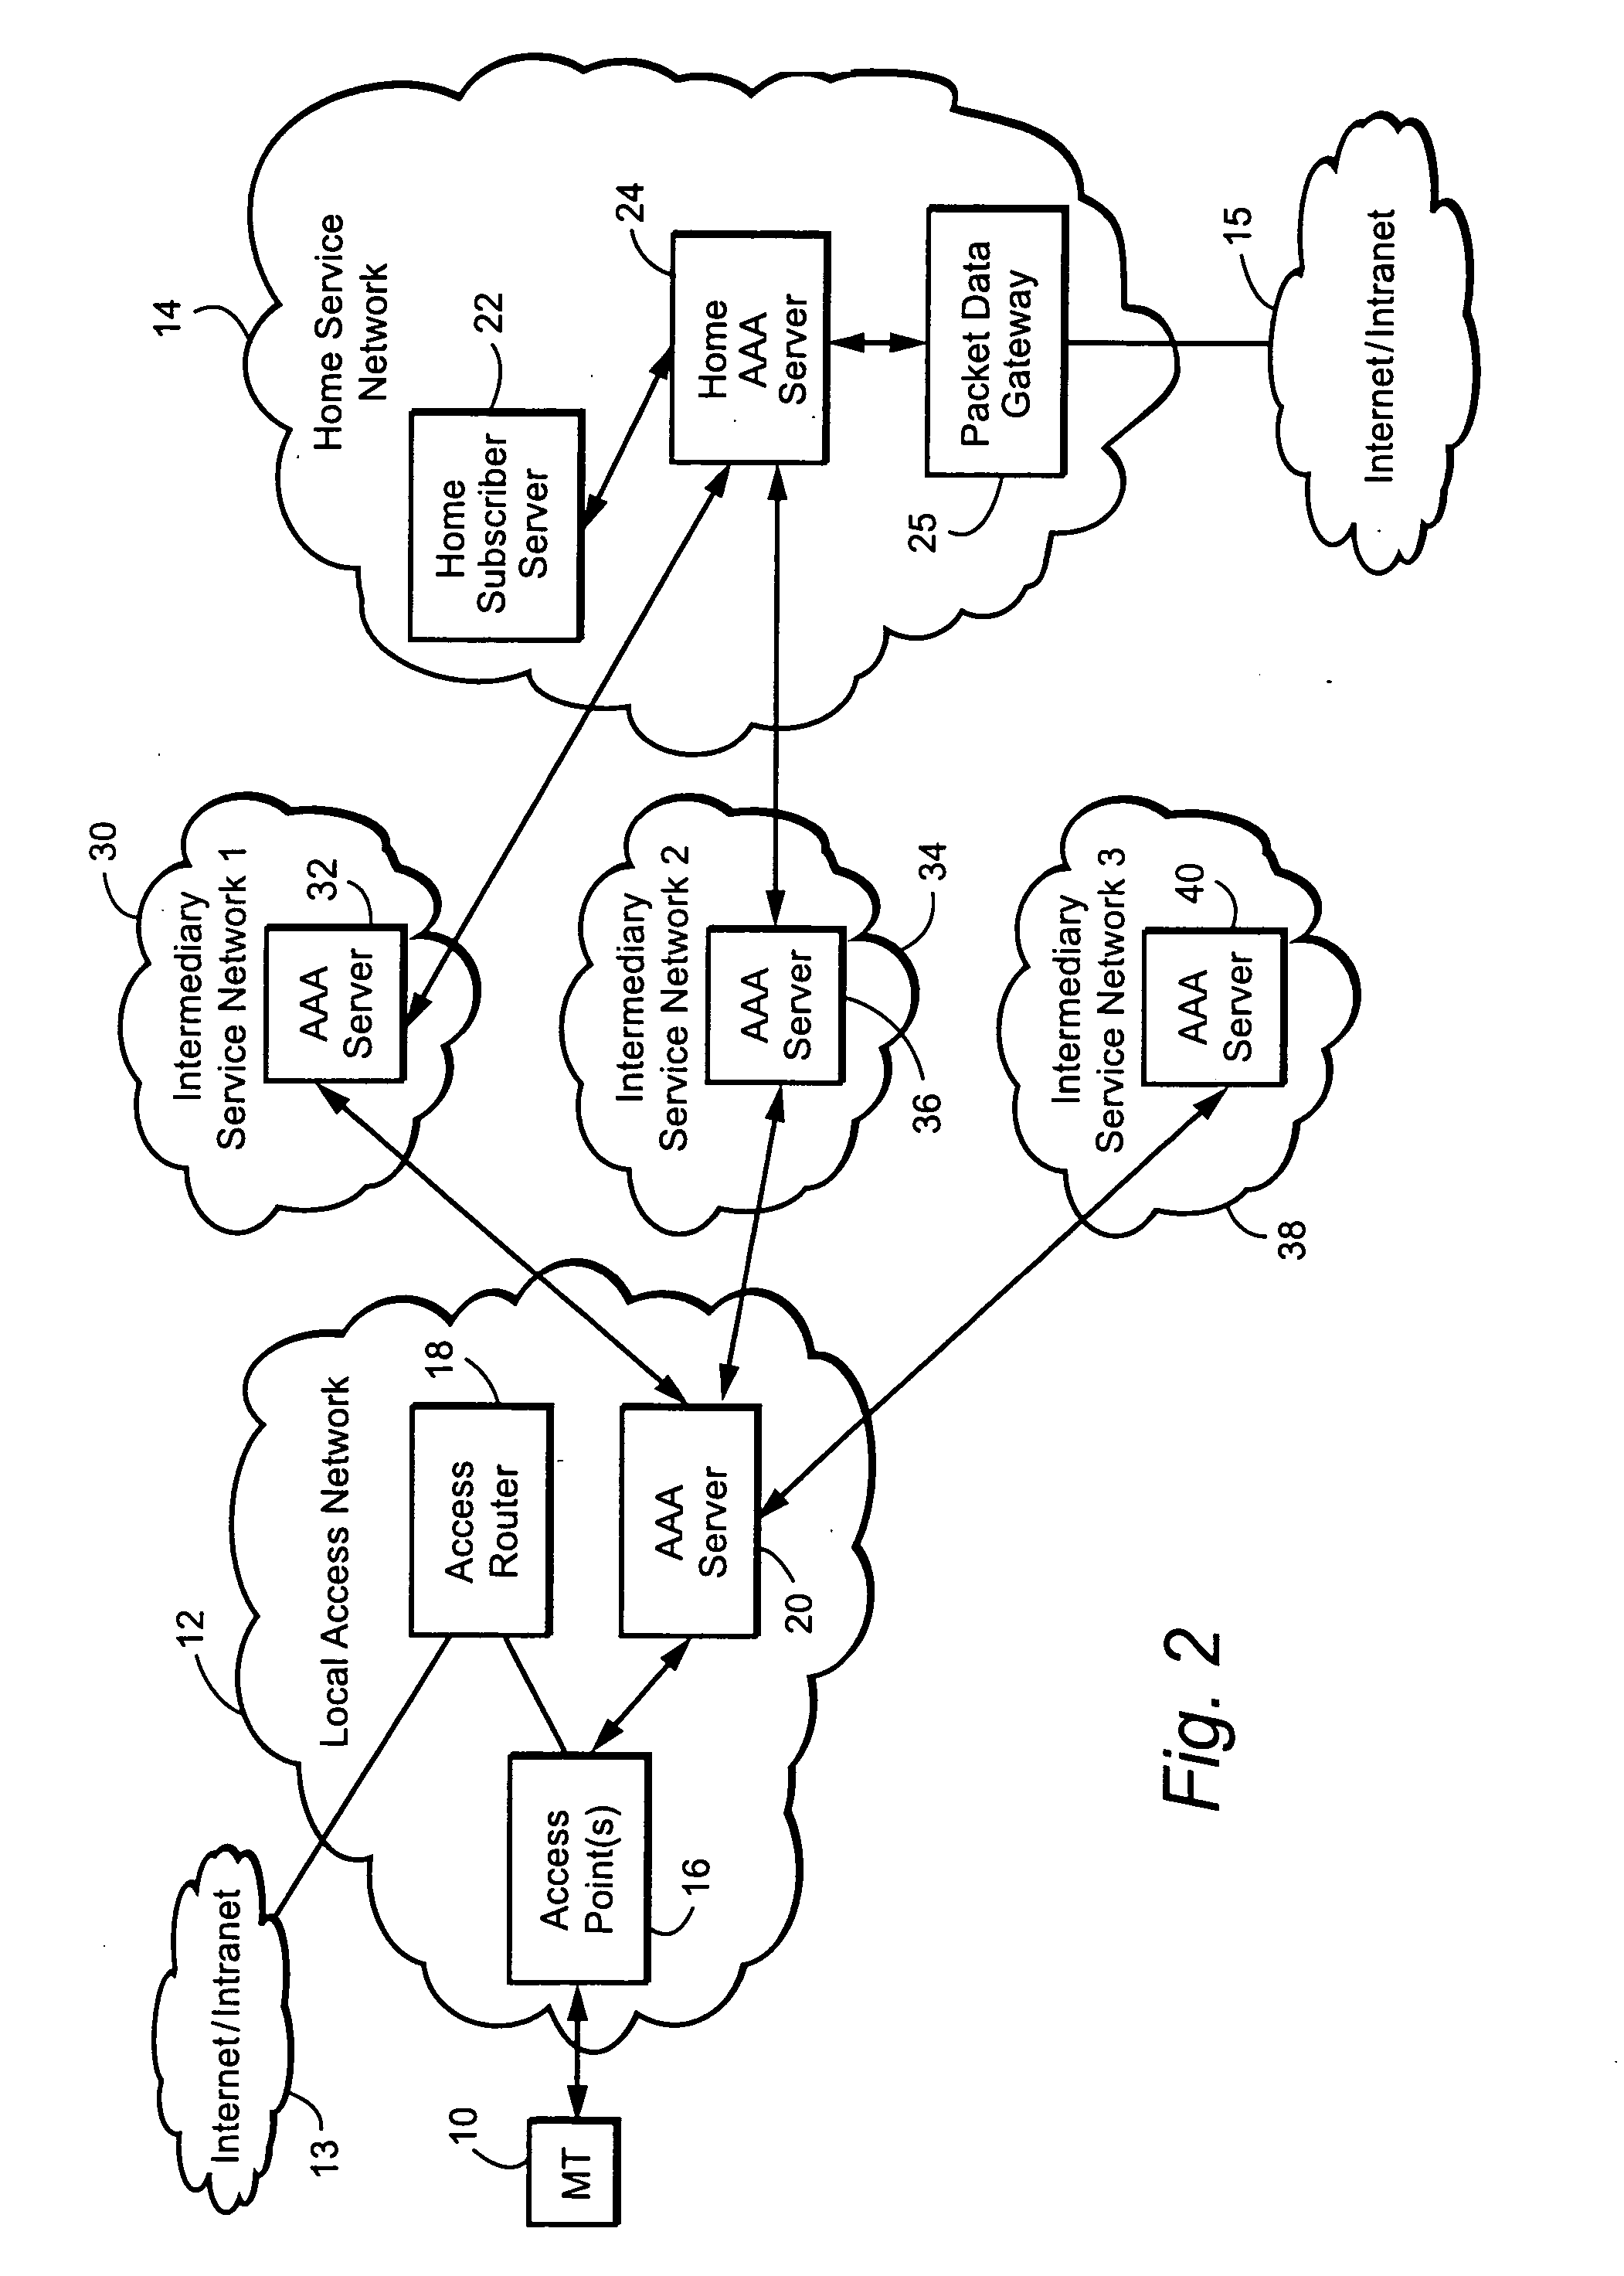 Enhancement of AAA routing initiated from a home service network involving intermediary network preferences